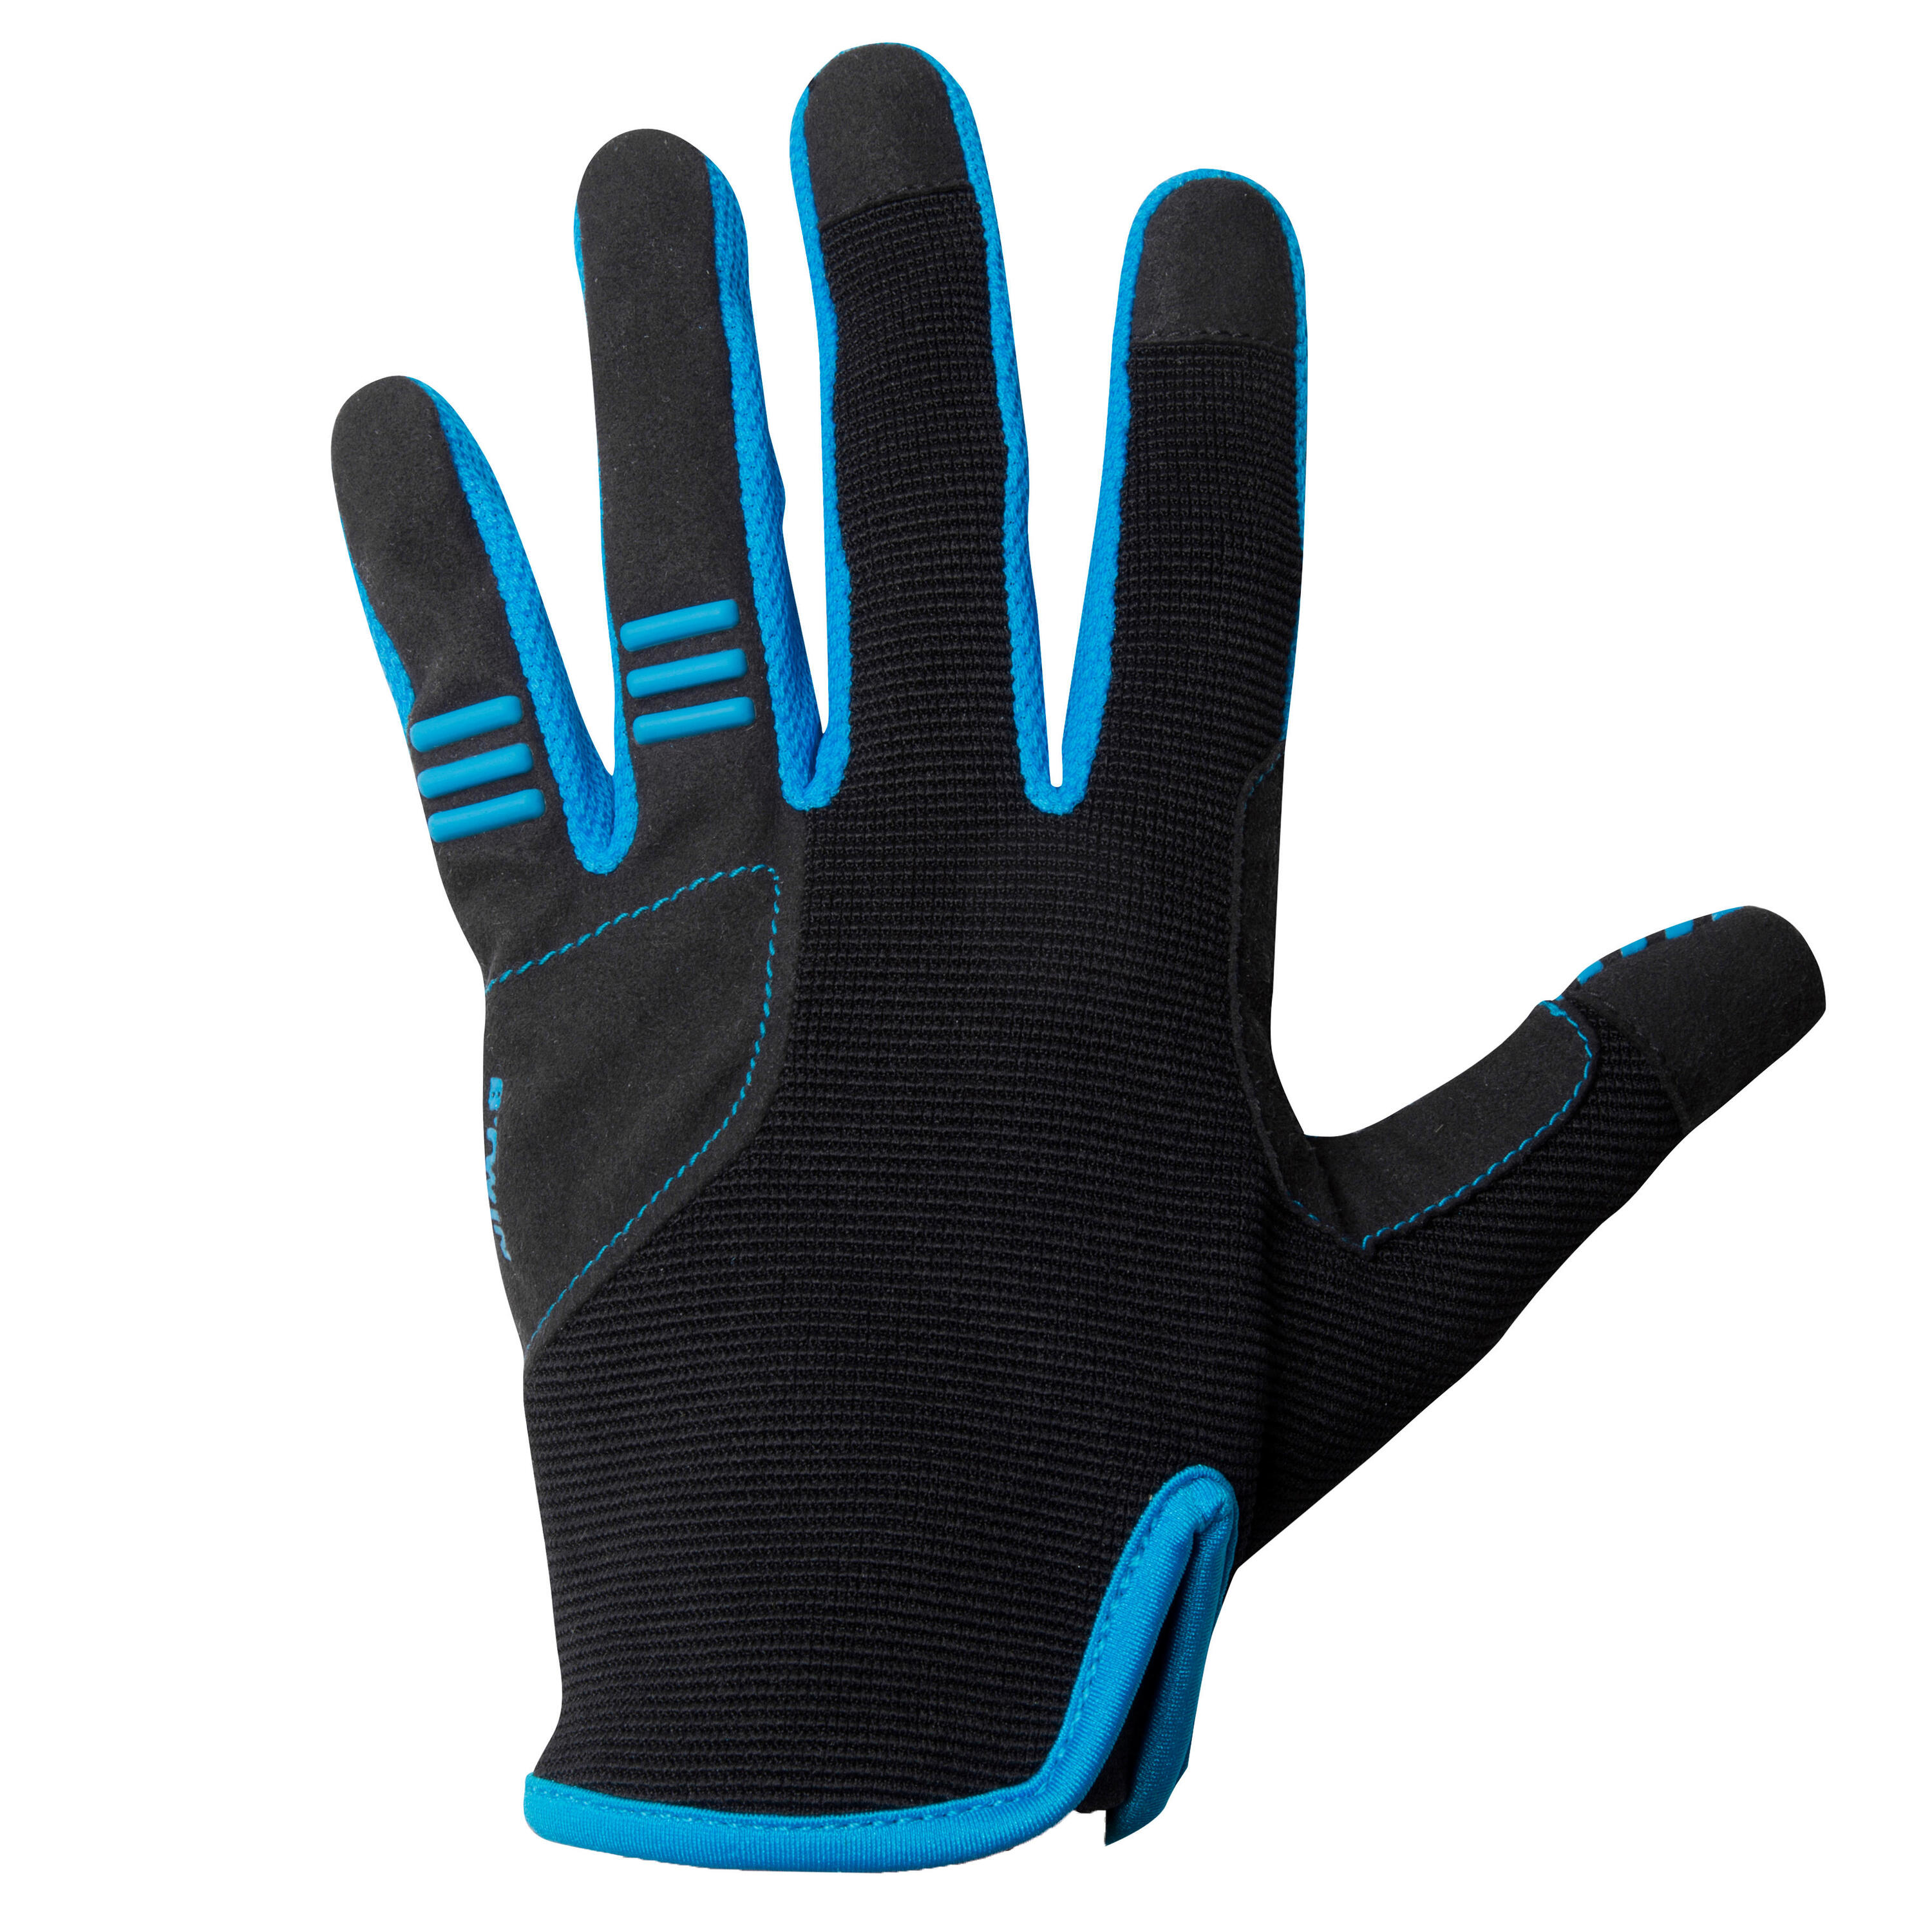 BTWIN Kids' Long Cycling Gloves